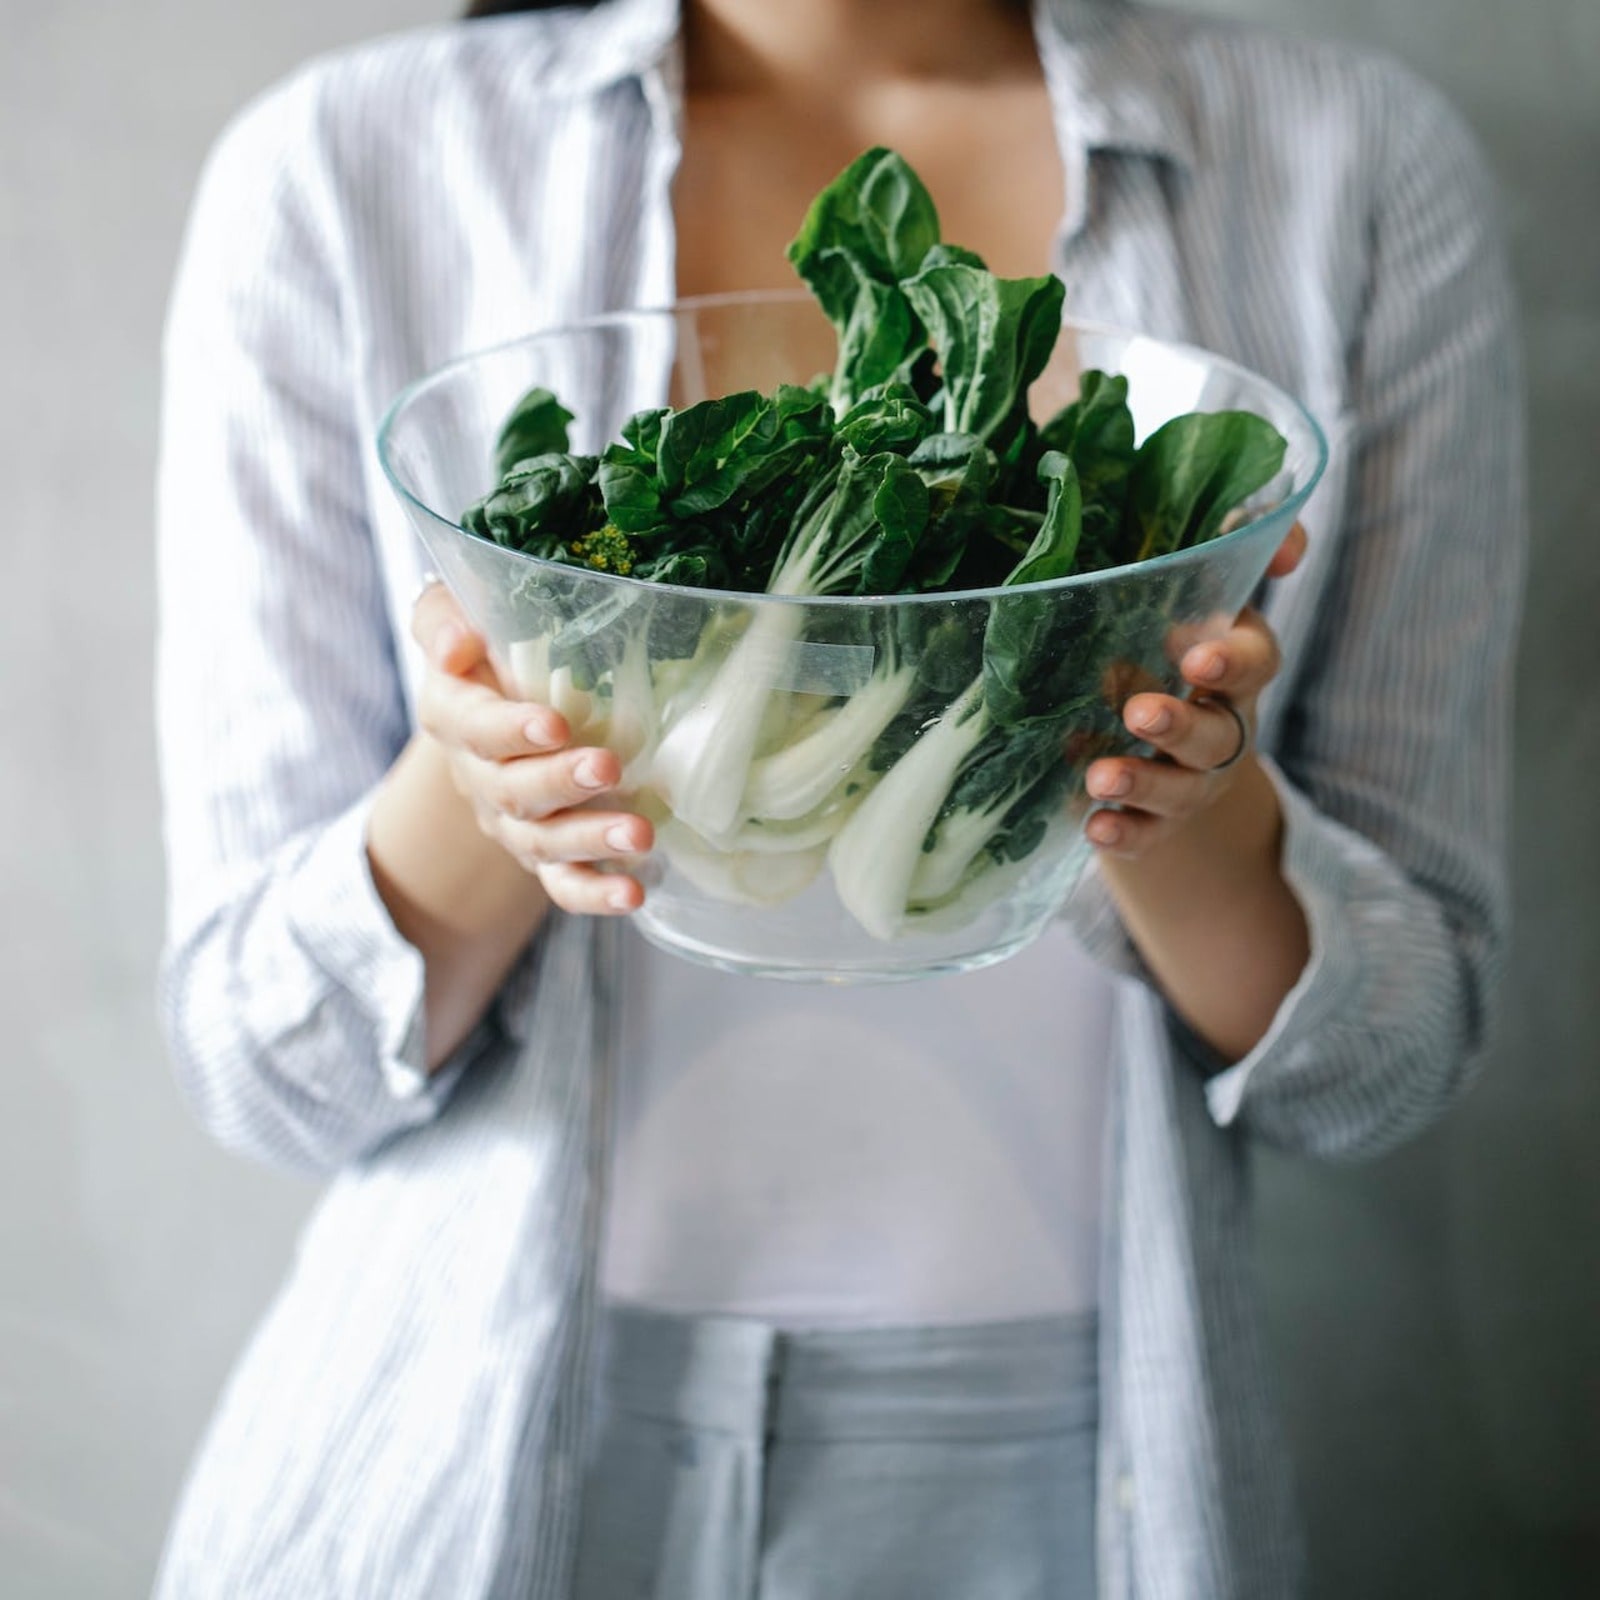 Take a Break From Spinach and Give Bok Choy a Try: The Crunchy Versatile Leafy Green From Asia